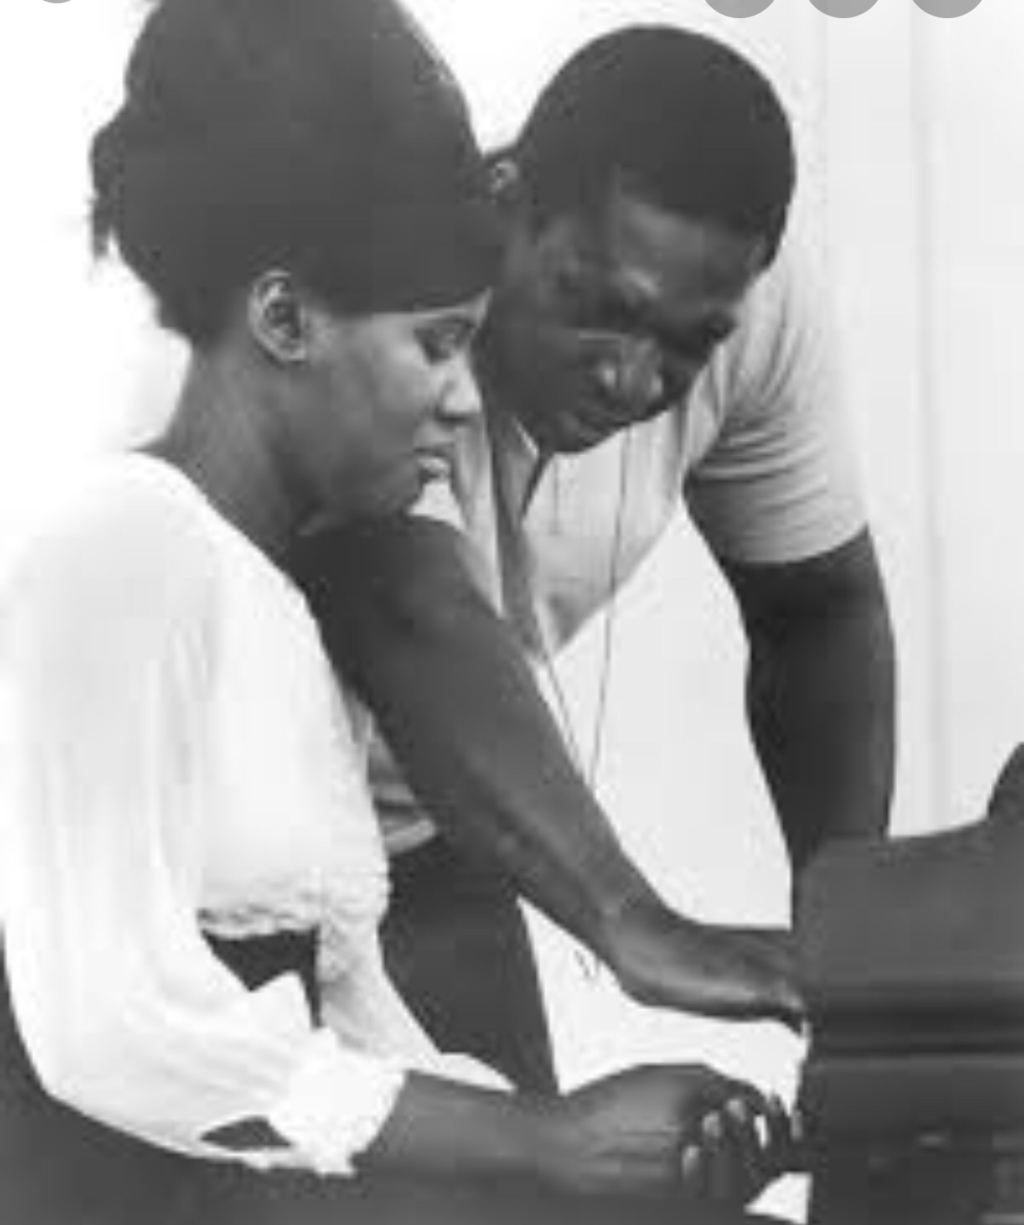 Universal Consciousness: Alice Coltrane’s Turn To Hinduism